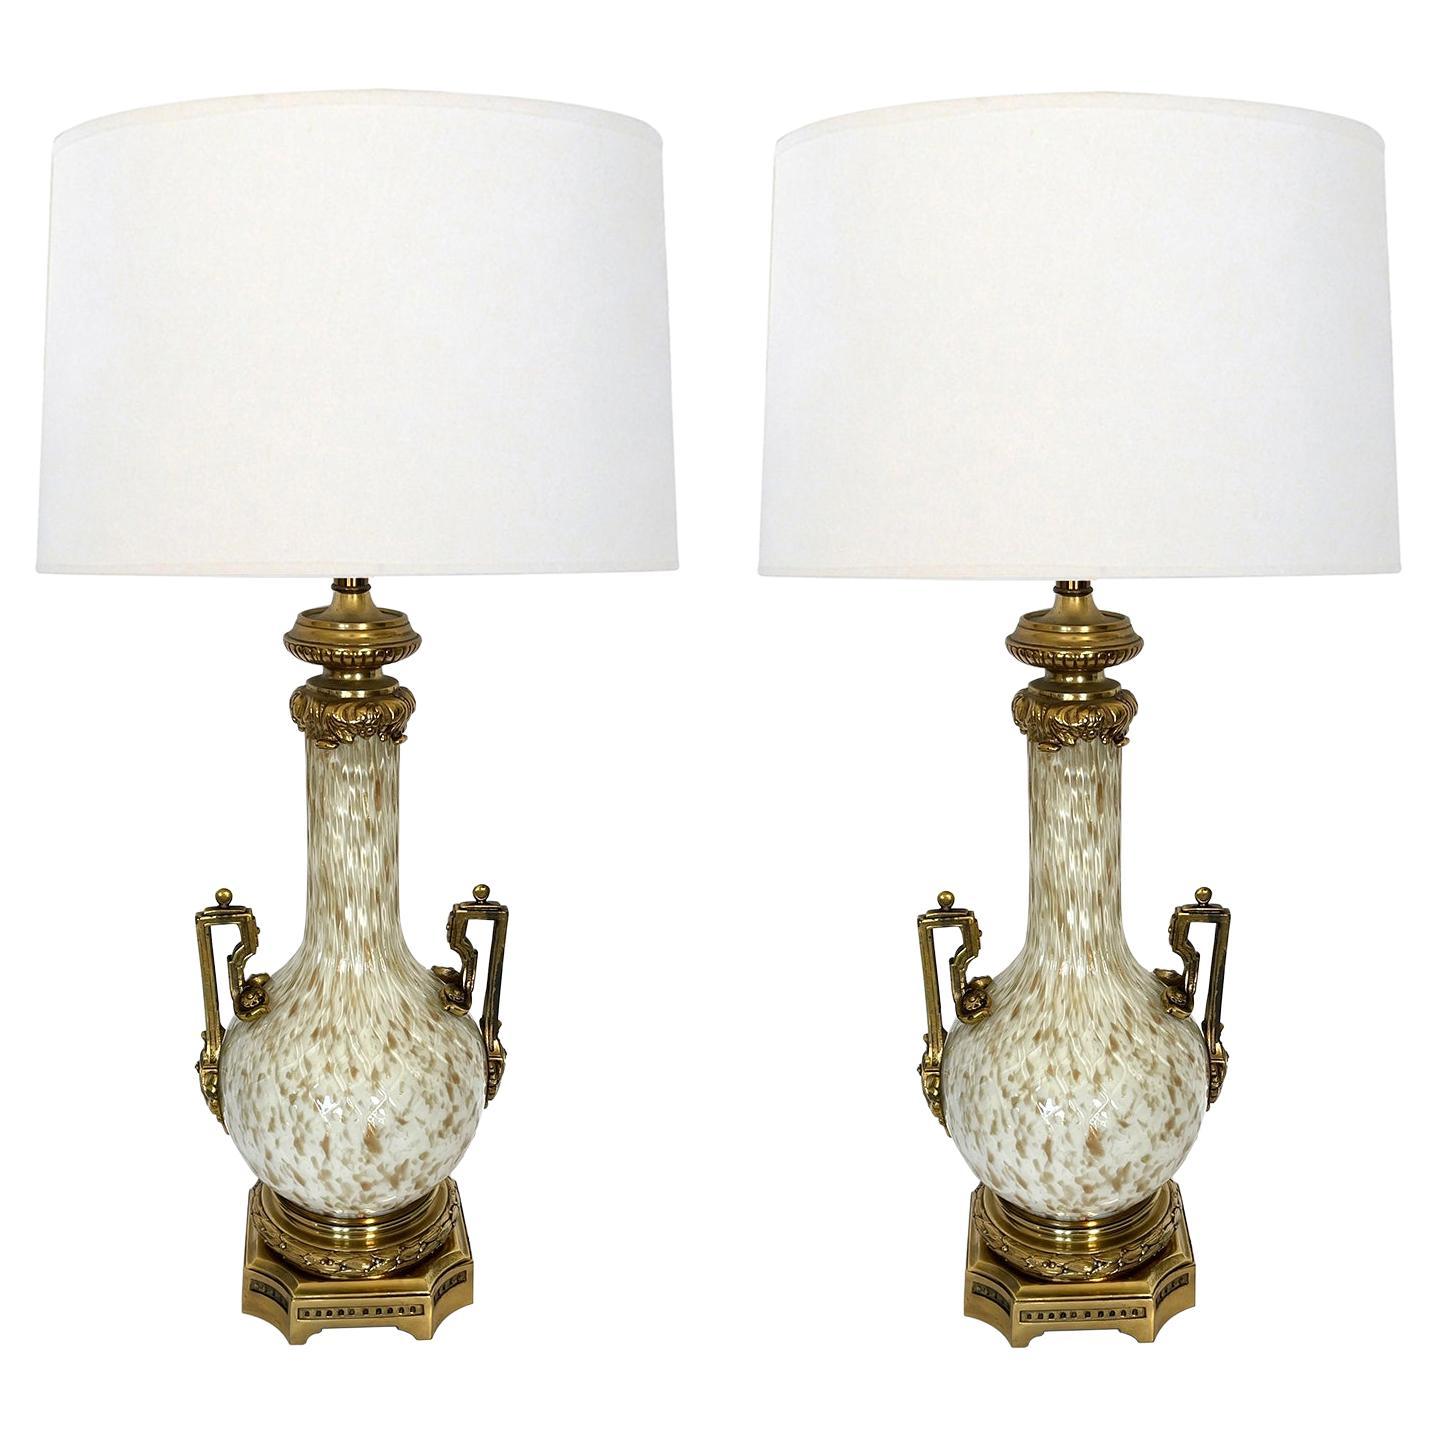 Pair of Murano Gold Aventurine Bottle-Form Lamps with Brass Mounts